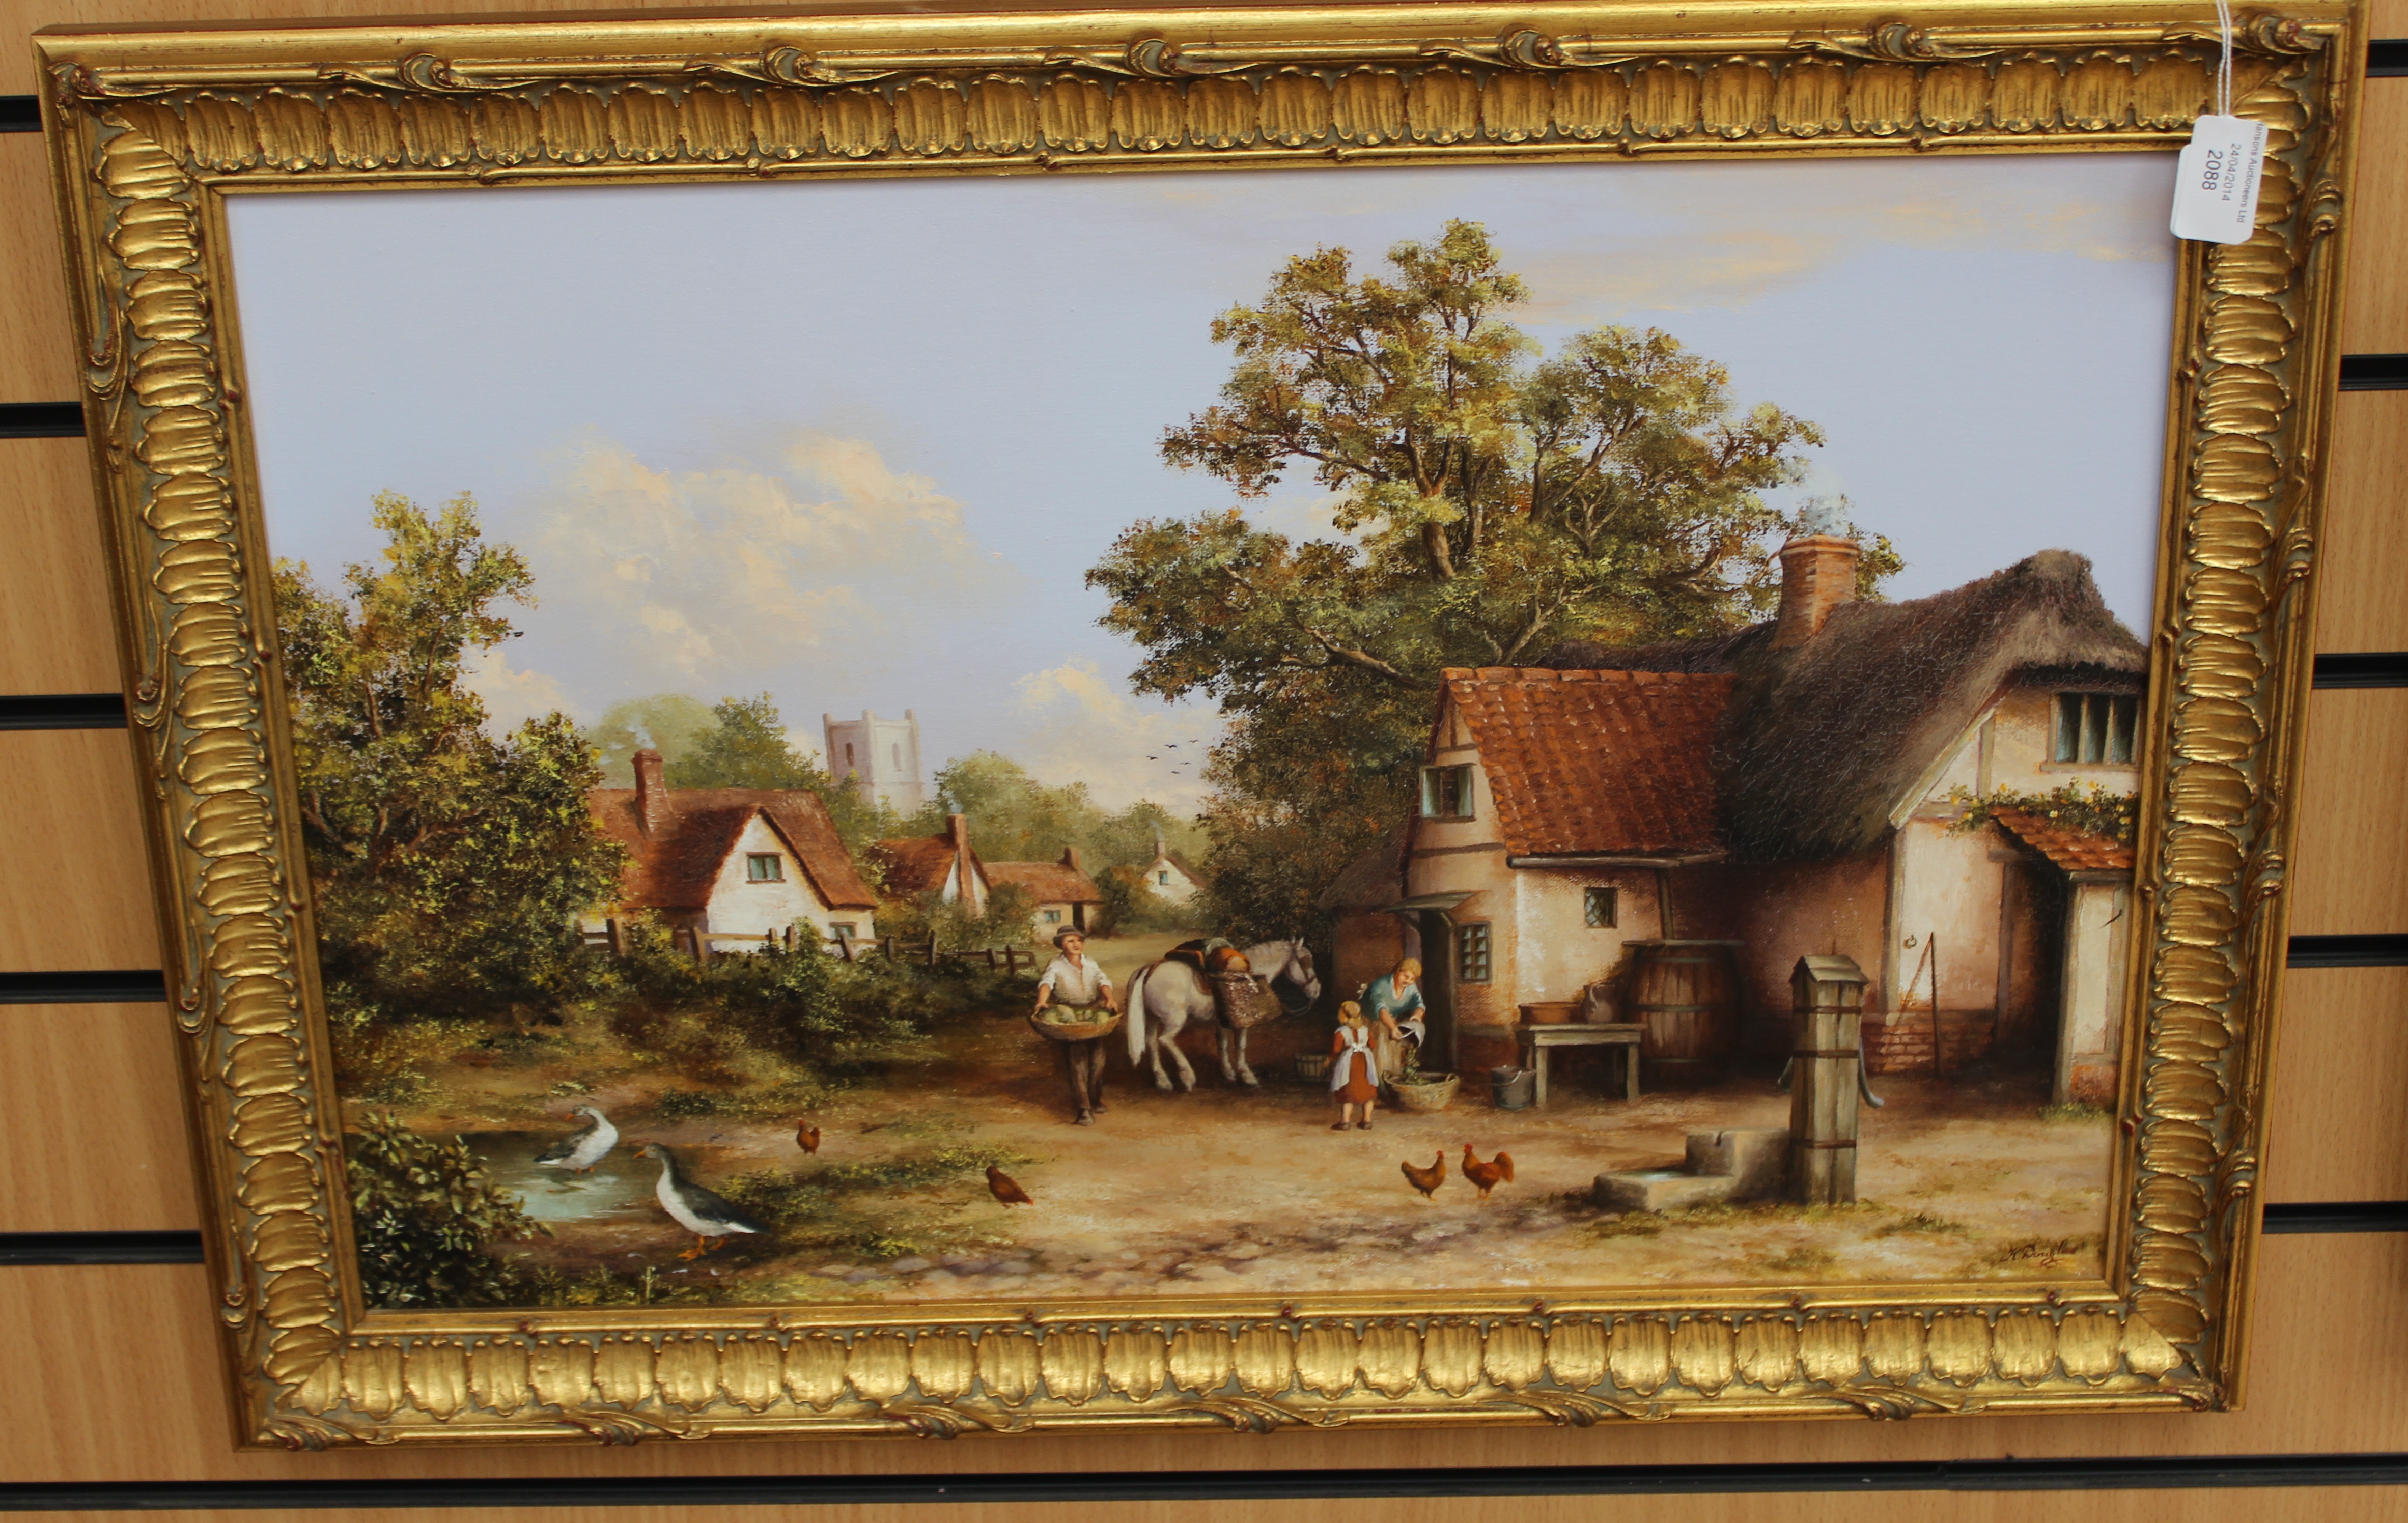 K Douglas oil on canvas, depicting a 19th Century Hamlet scene, with figures in the foreground,